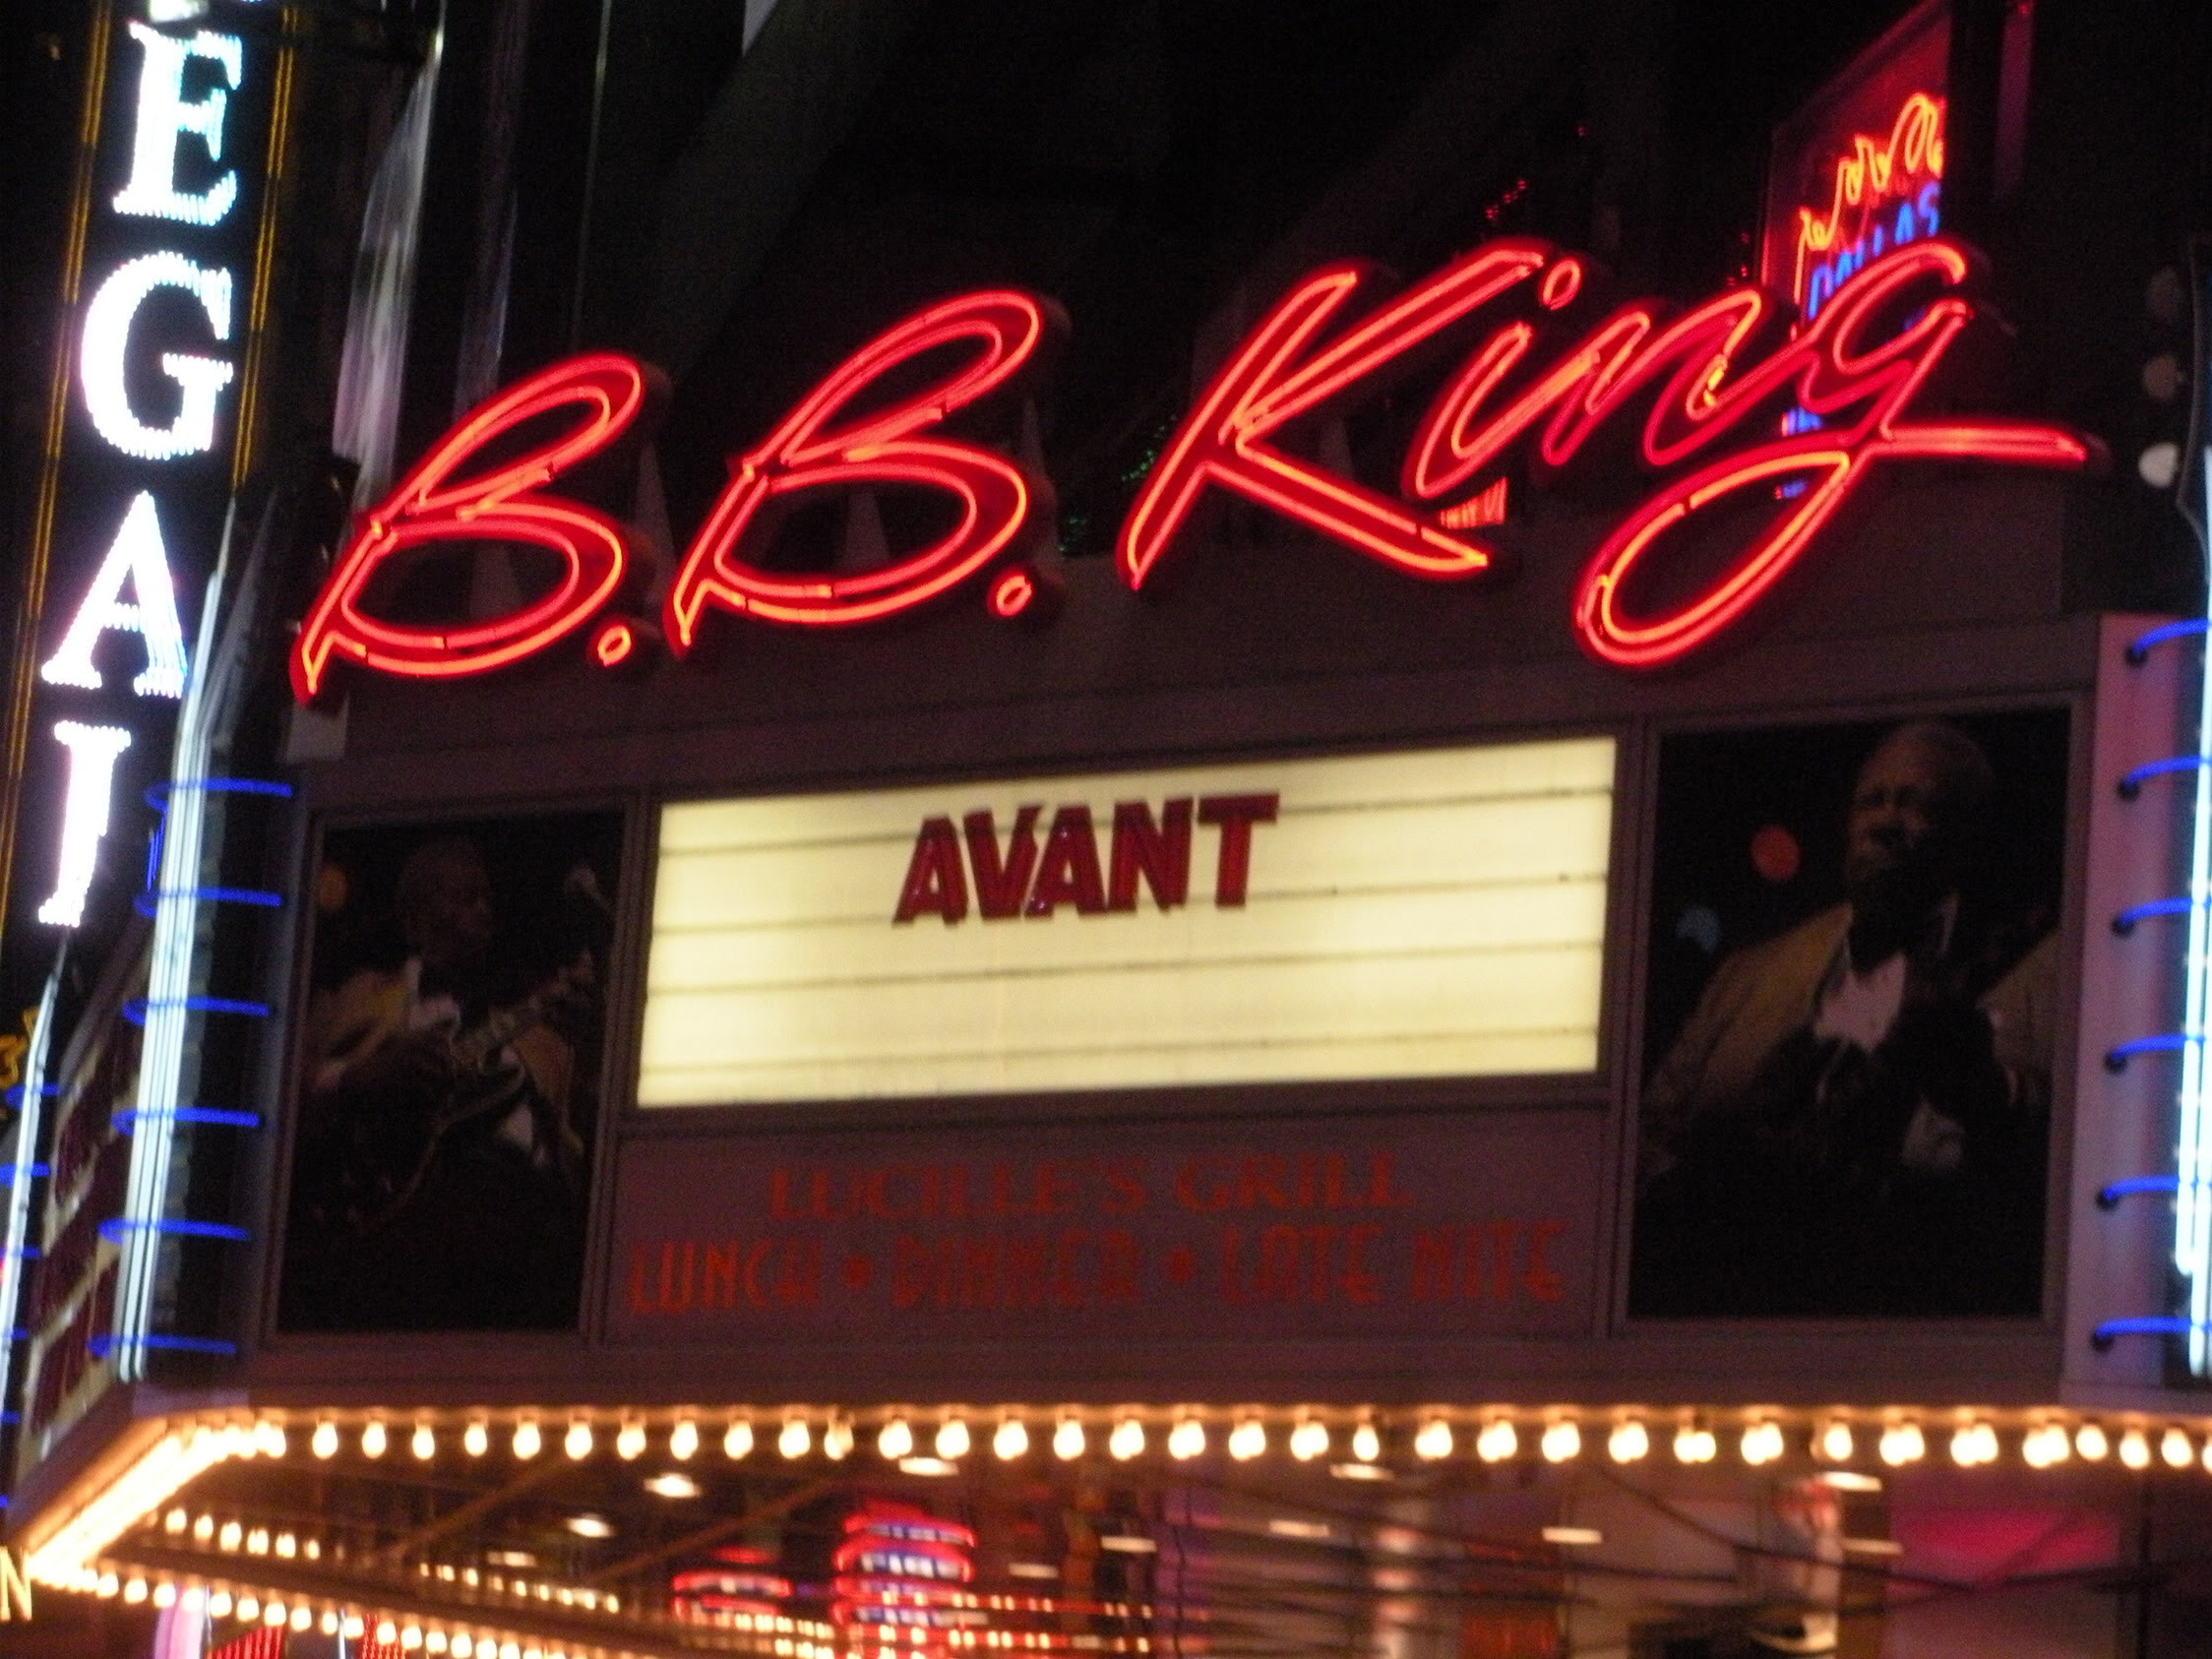 Avant Live Concert Footage at B.B. Kings in NYC 12/10/10 (Part 2 of 2)